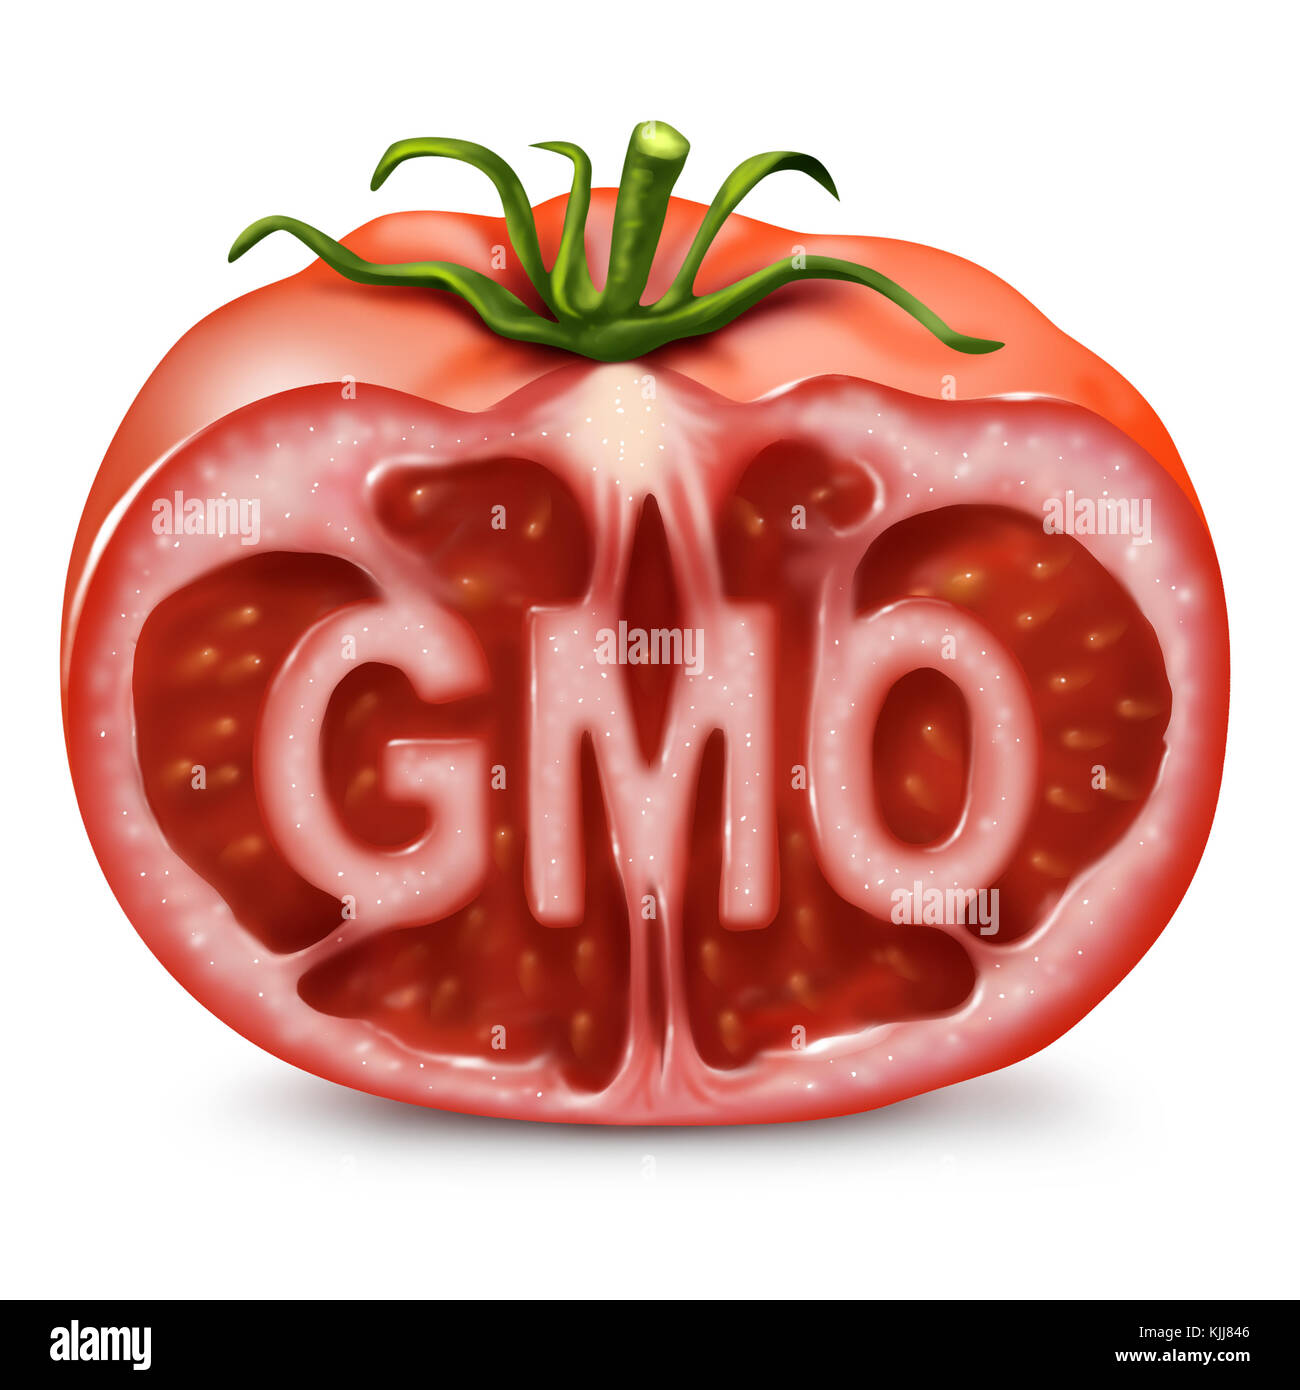 GMO food symbol as a genetically modified organism and genetic engineering in produce as a cut tomato with text inside as in a 3D illustration style. Stock Photo